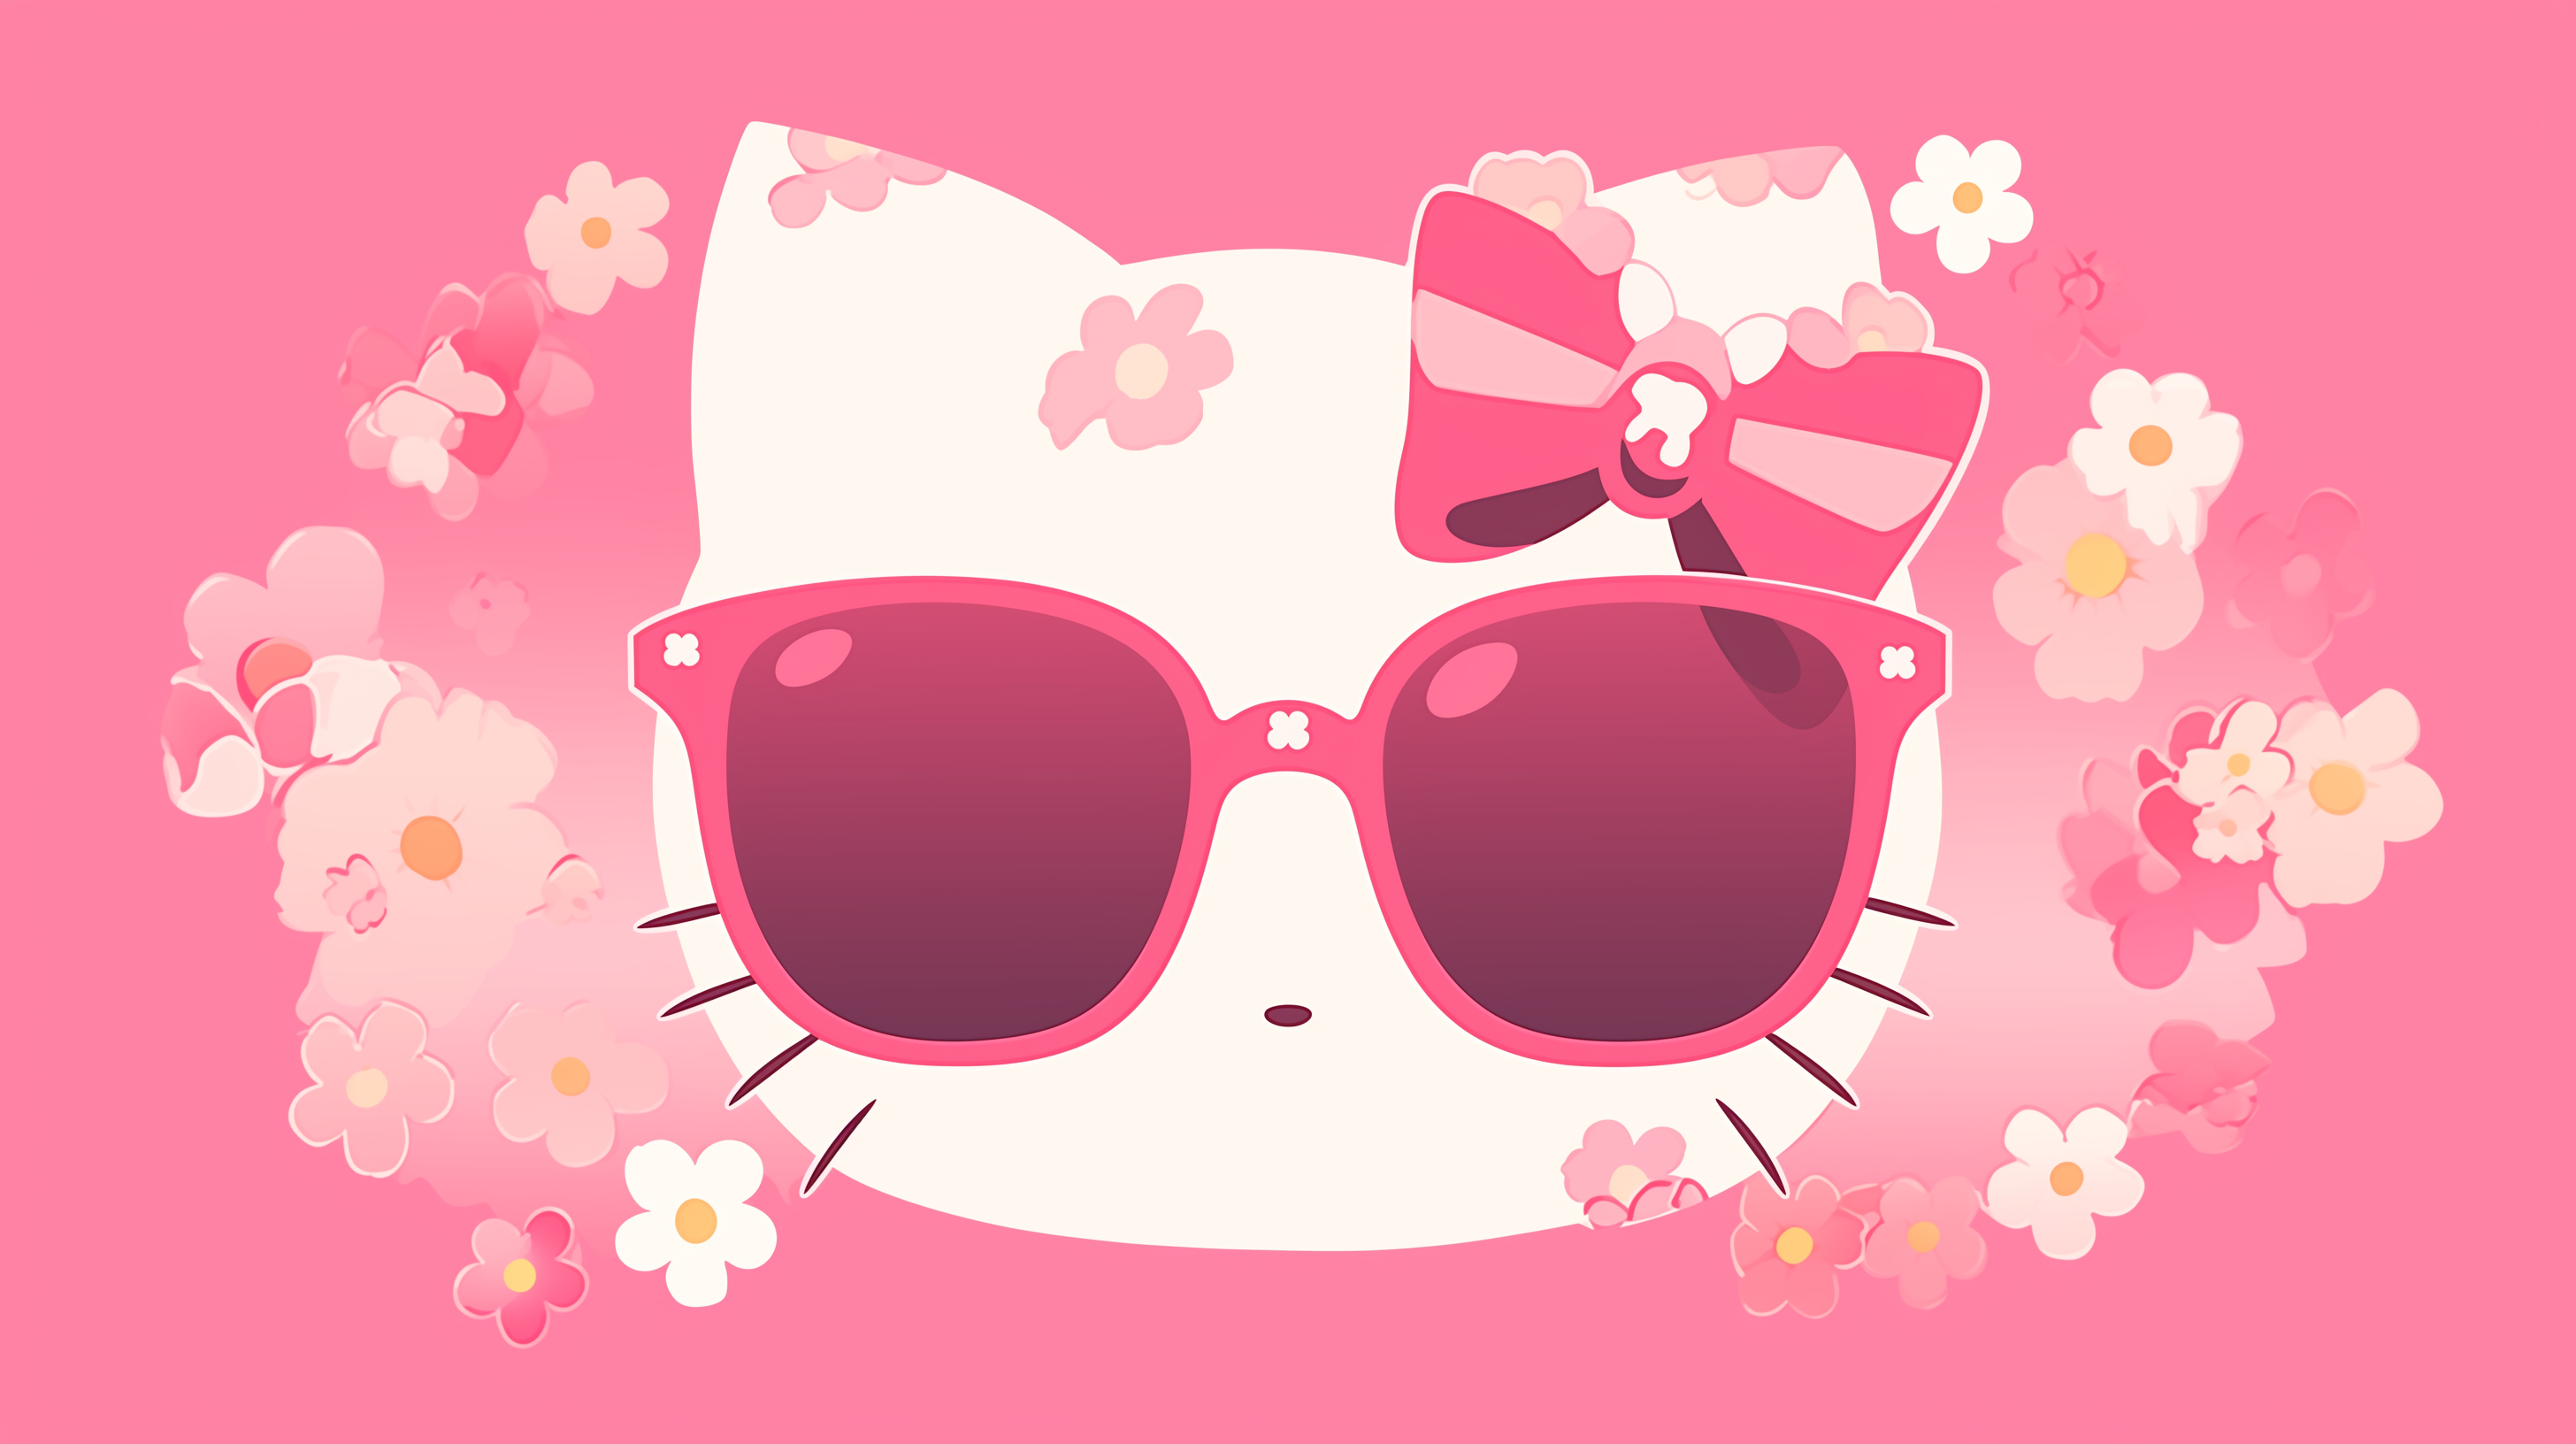 Stylish Hello Kitty wearing sunglasses wallpaper in HD, featuring a cute character on a pink floral background for desktop.